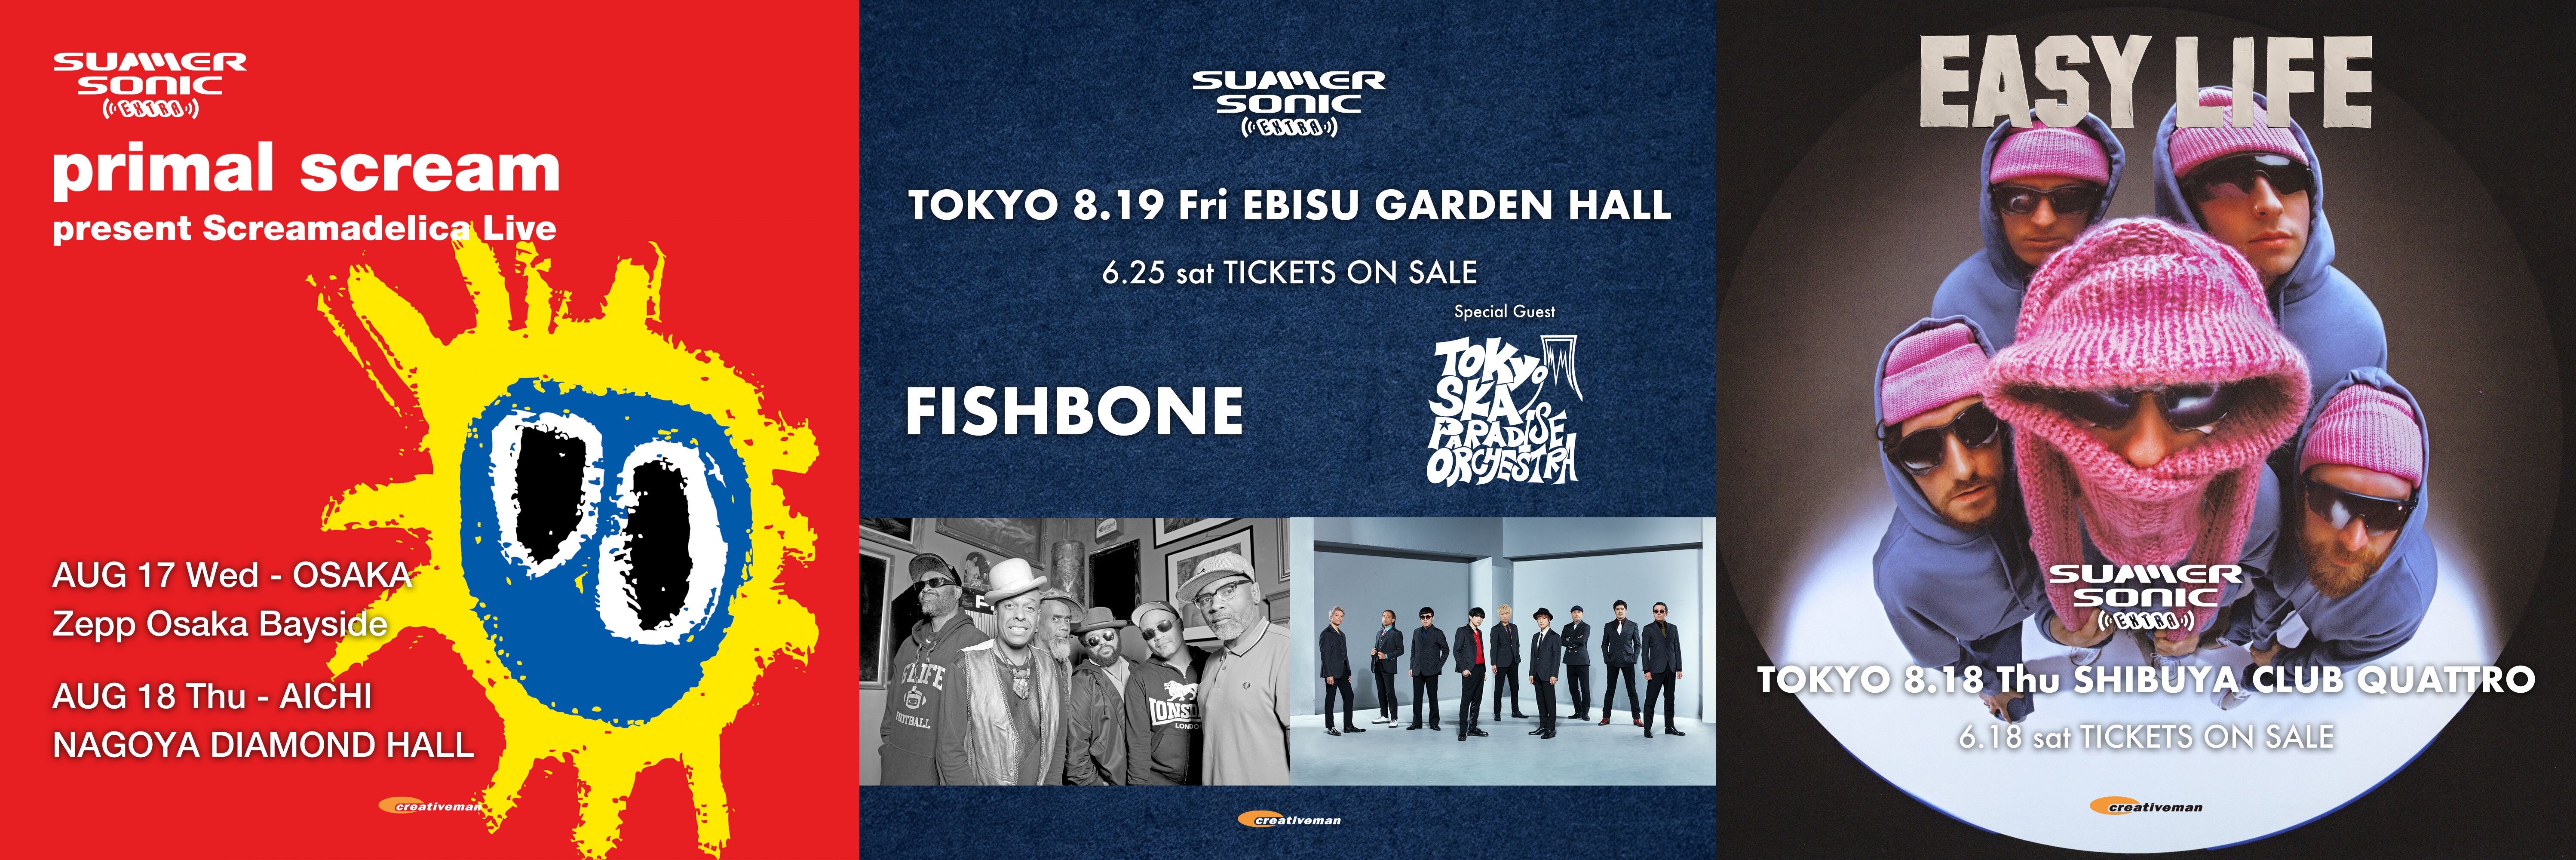 SUMMER SONIC EXTRA」として新たにPRIMAL SCREAM、FISHBONE、EASY LIFEの公演決定 TOWER  RECORDS ONLINE